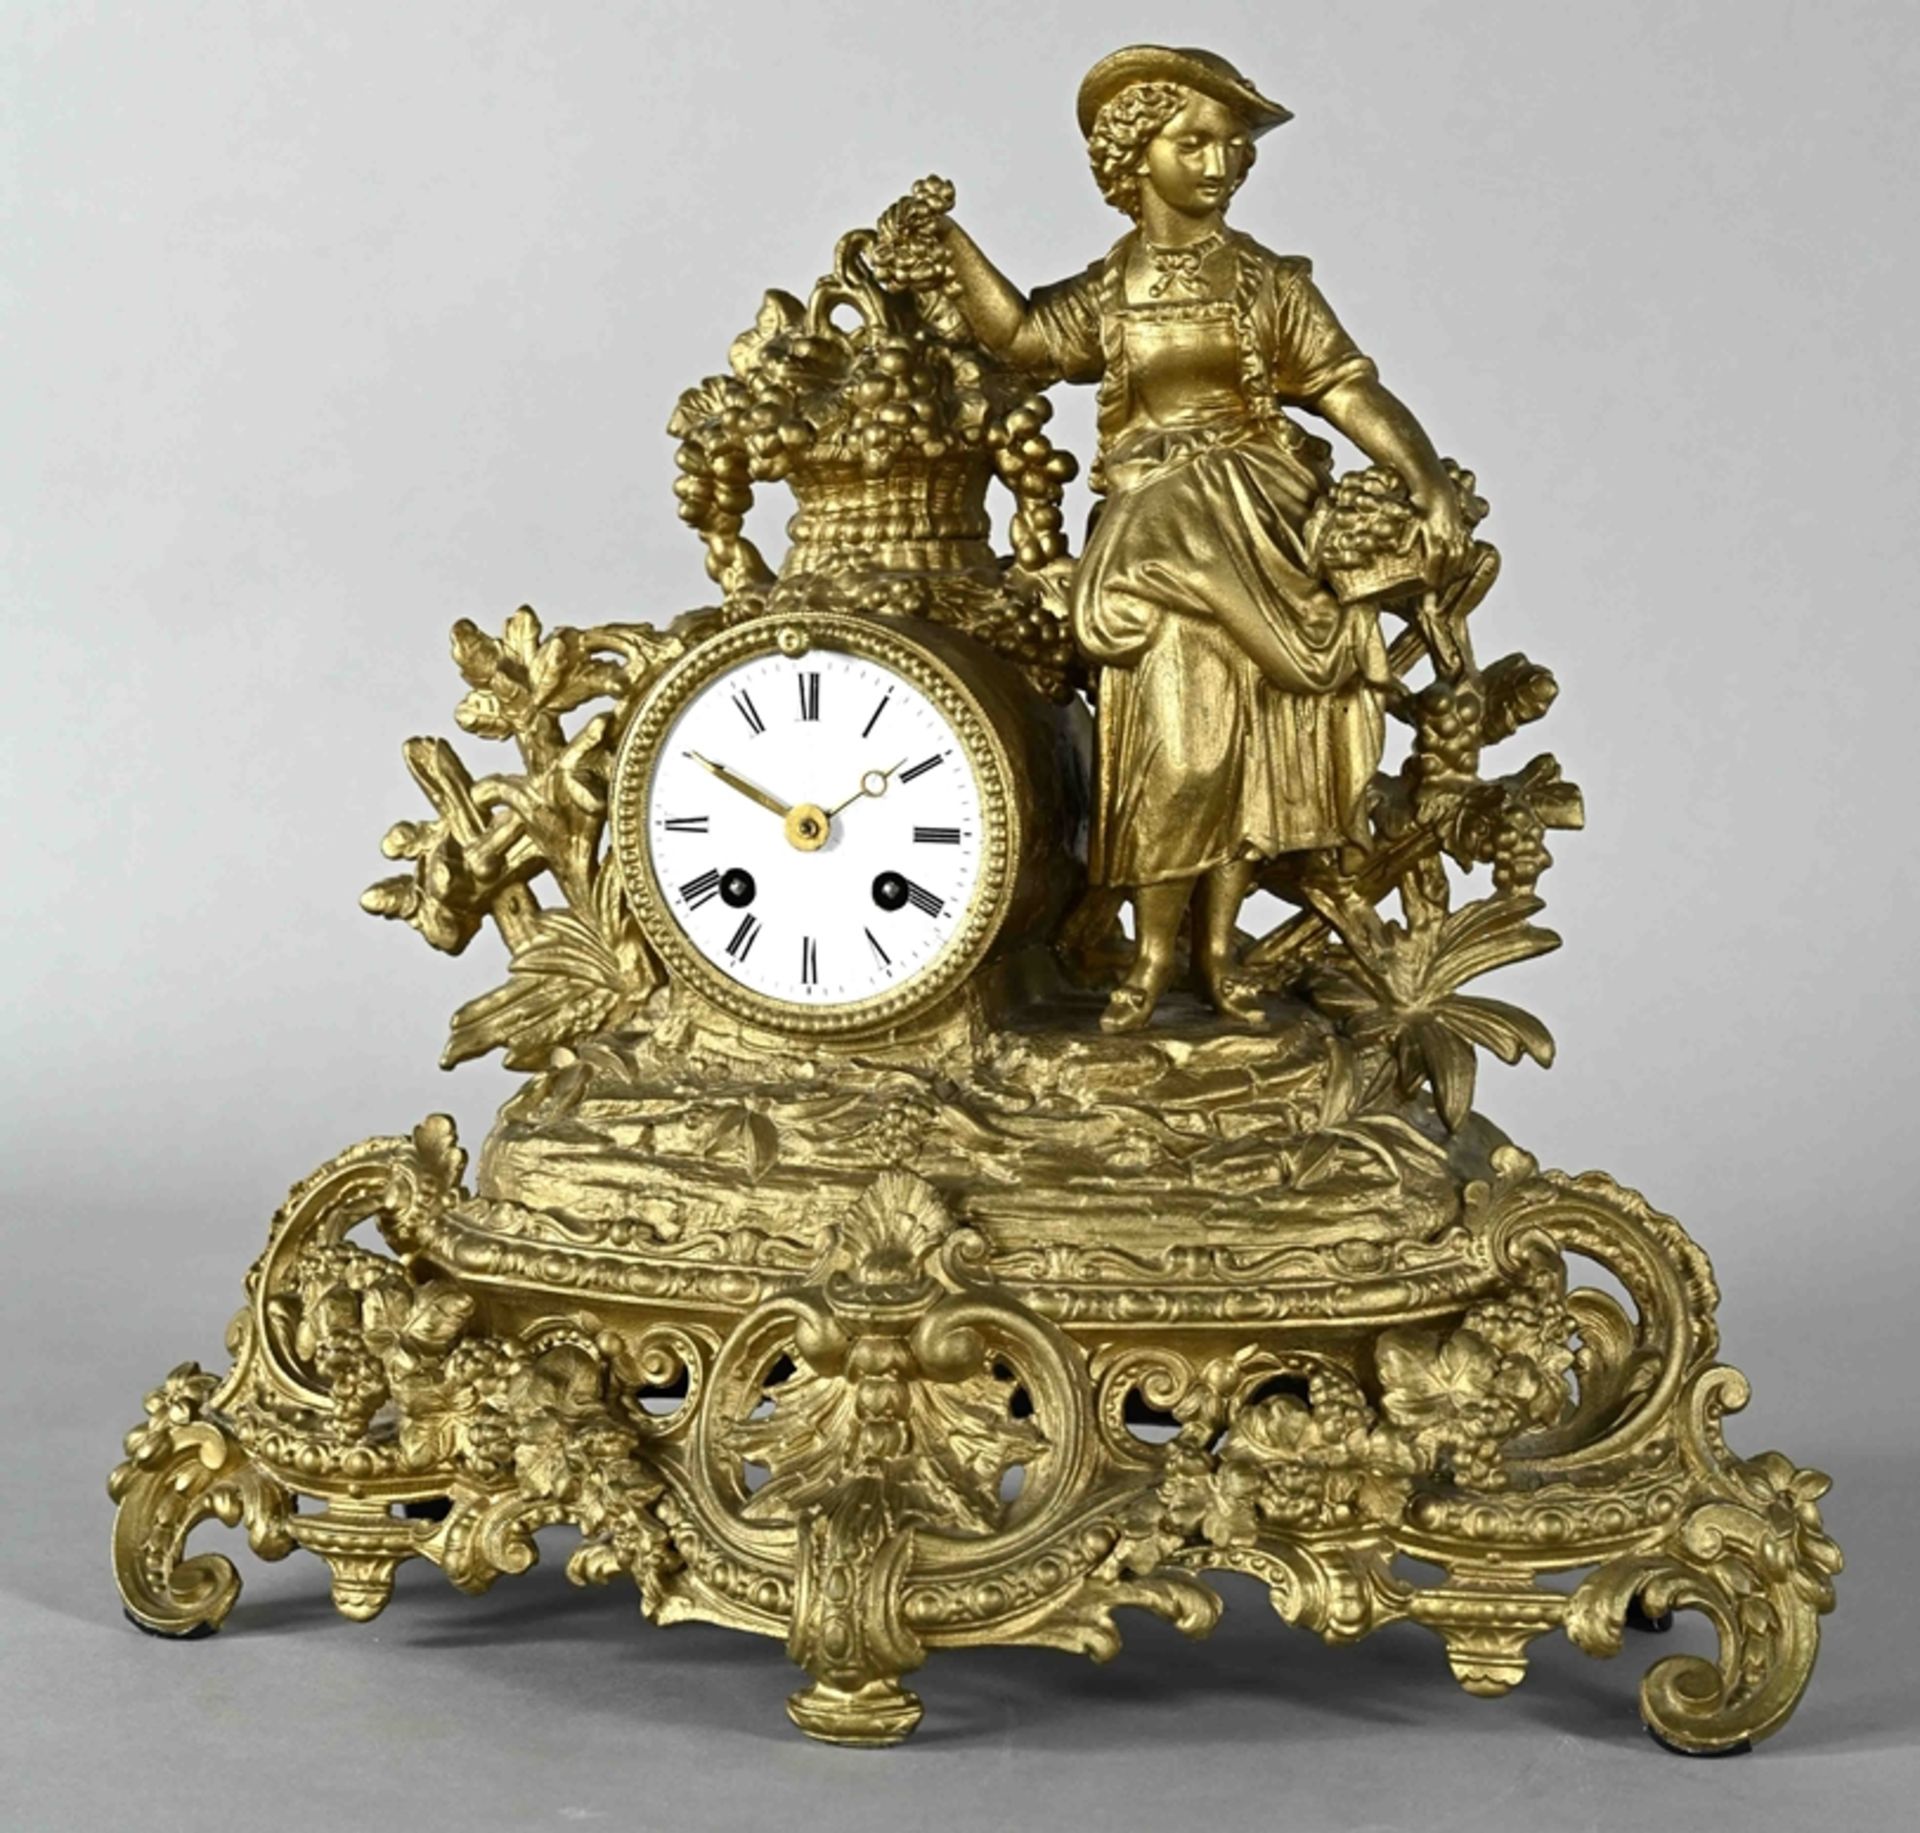 Figural table clock, German circa 1880, representation of the wine queen, bronzed pewter casting, h